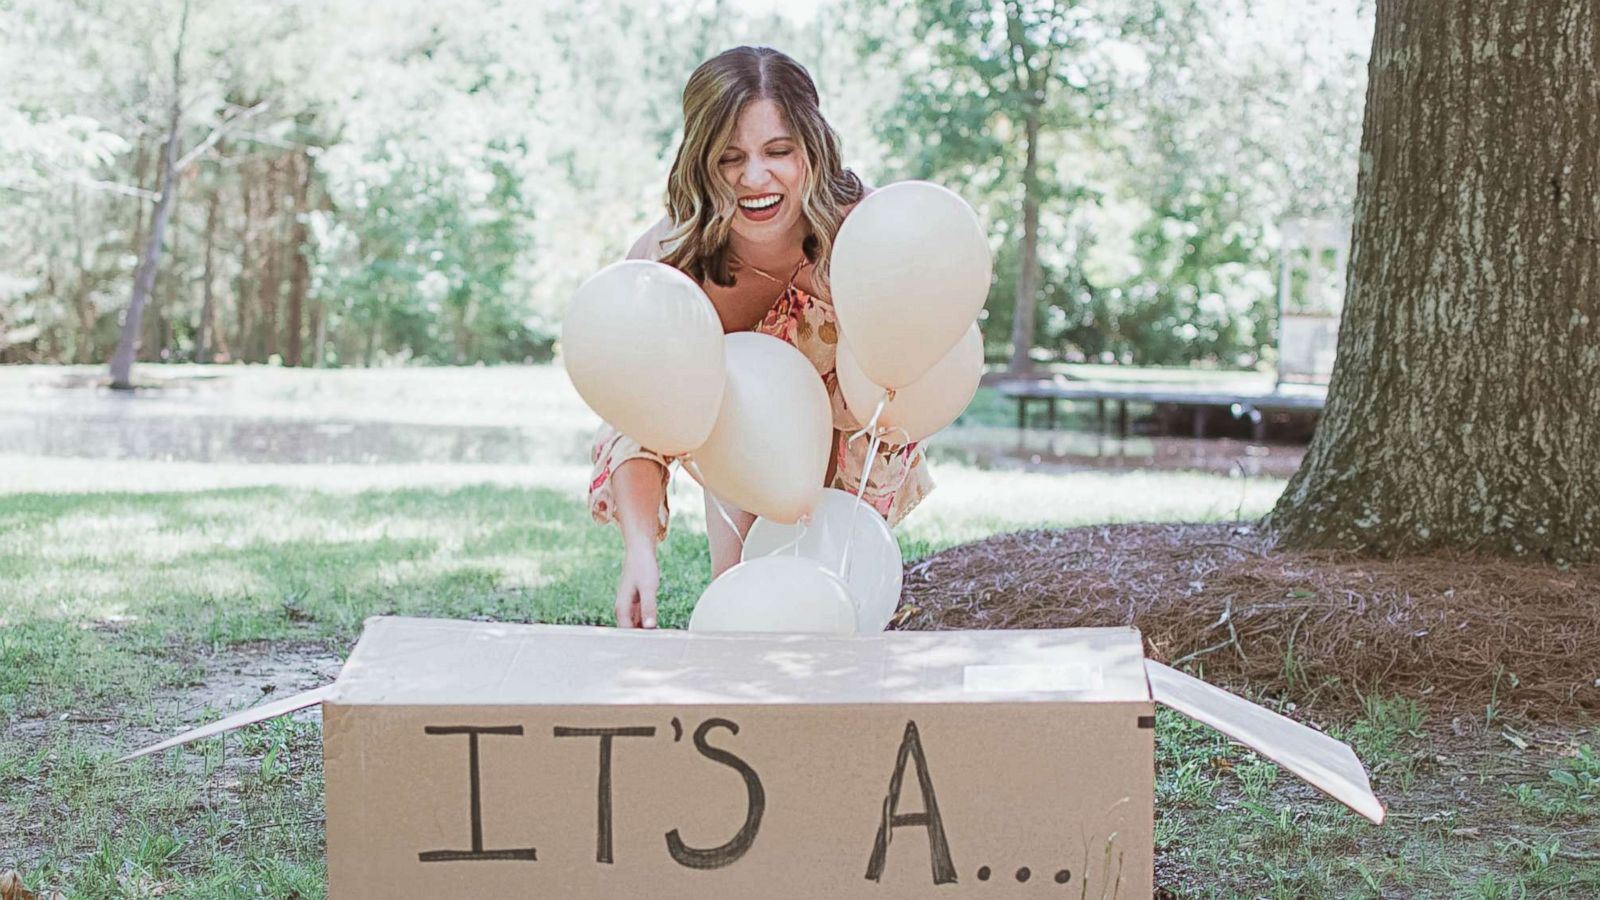 PHOTO: Joy Stone, 25, of Melissa, Texas, was photographed with her new dog in a gender-reveal-style photo shoot.